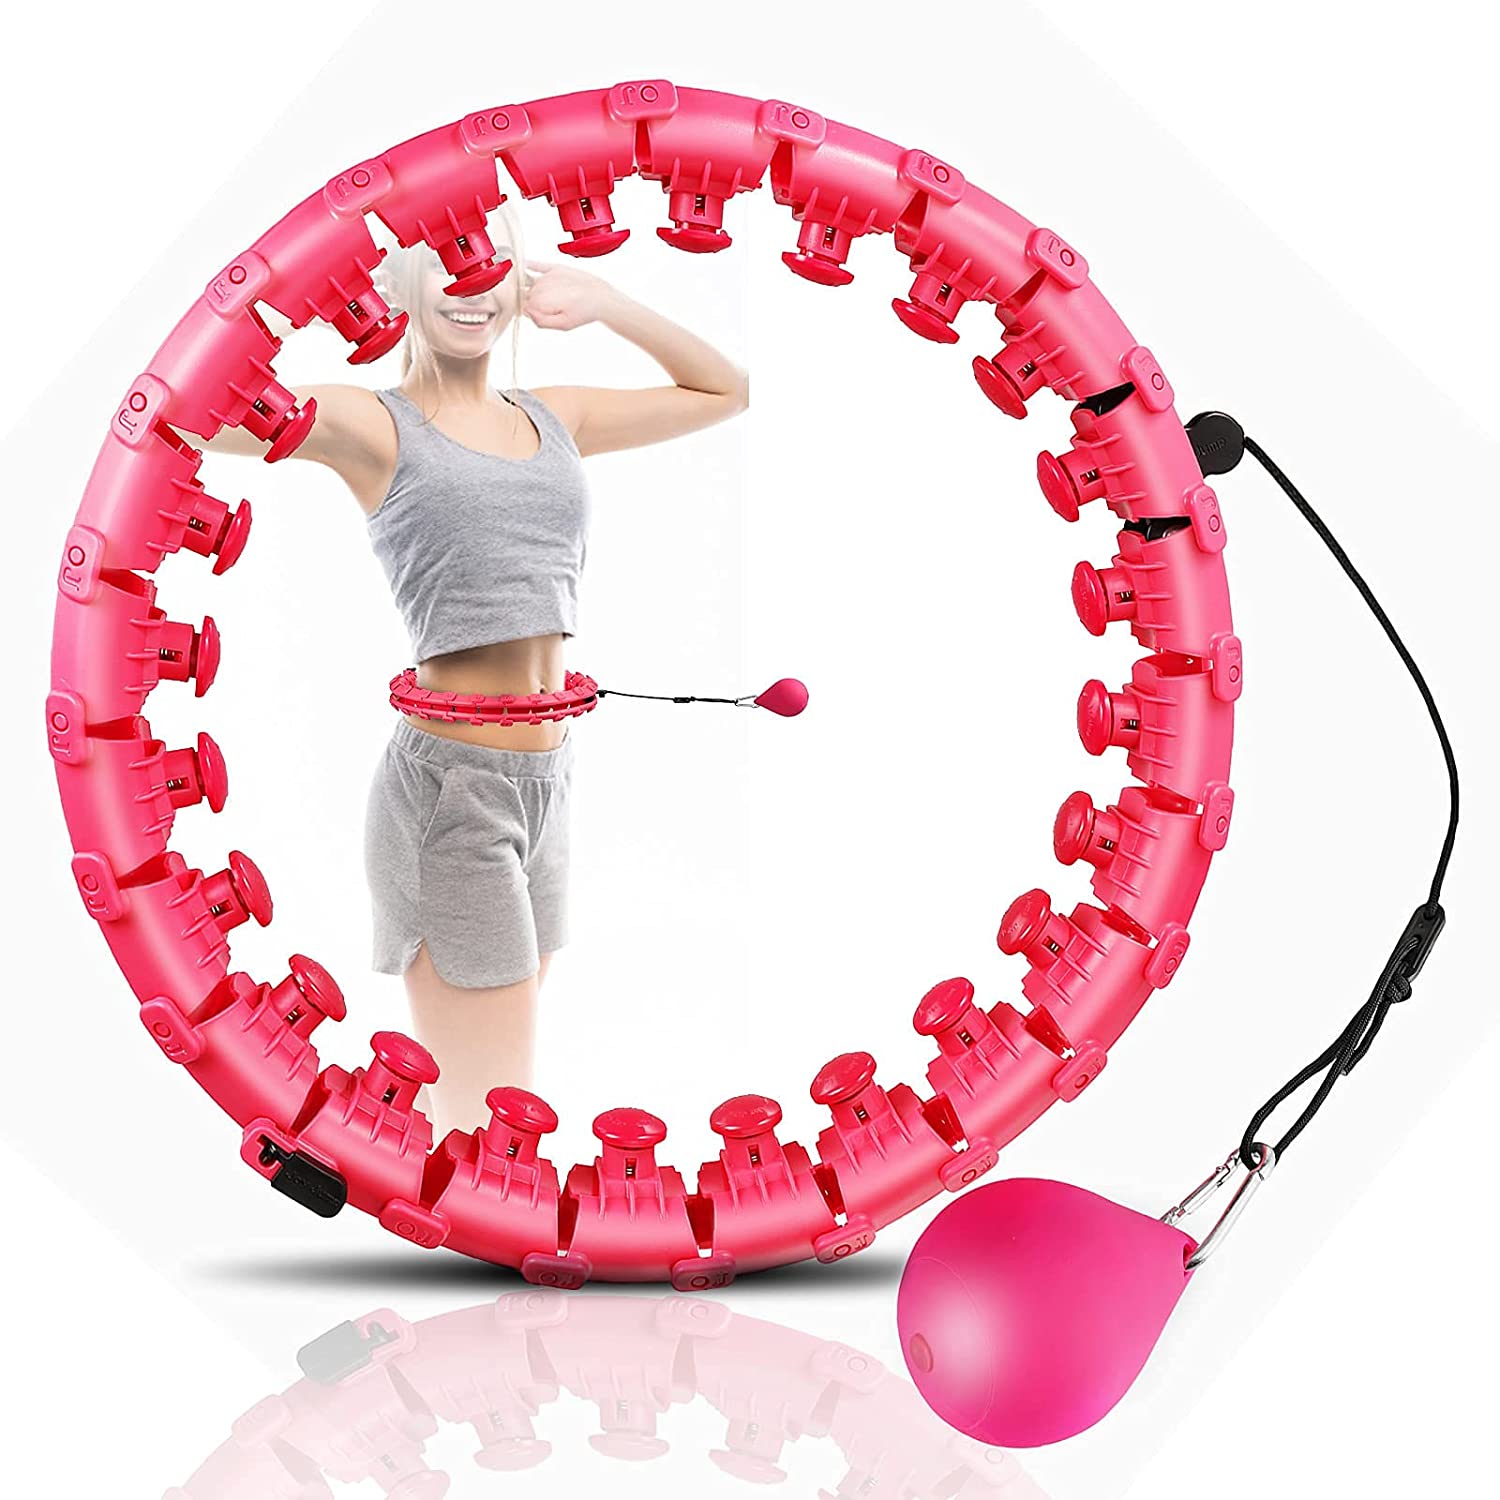 New 24 Detachable Knots Adult Fitness Smart Weighted Hoola Hoop Hula Ring Hula Hoops with Weight ball